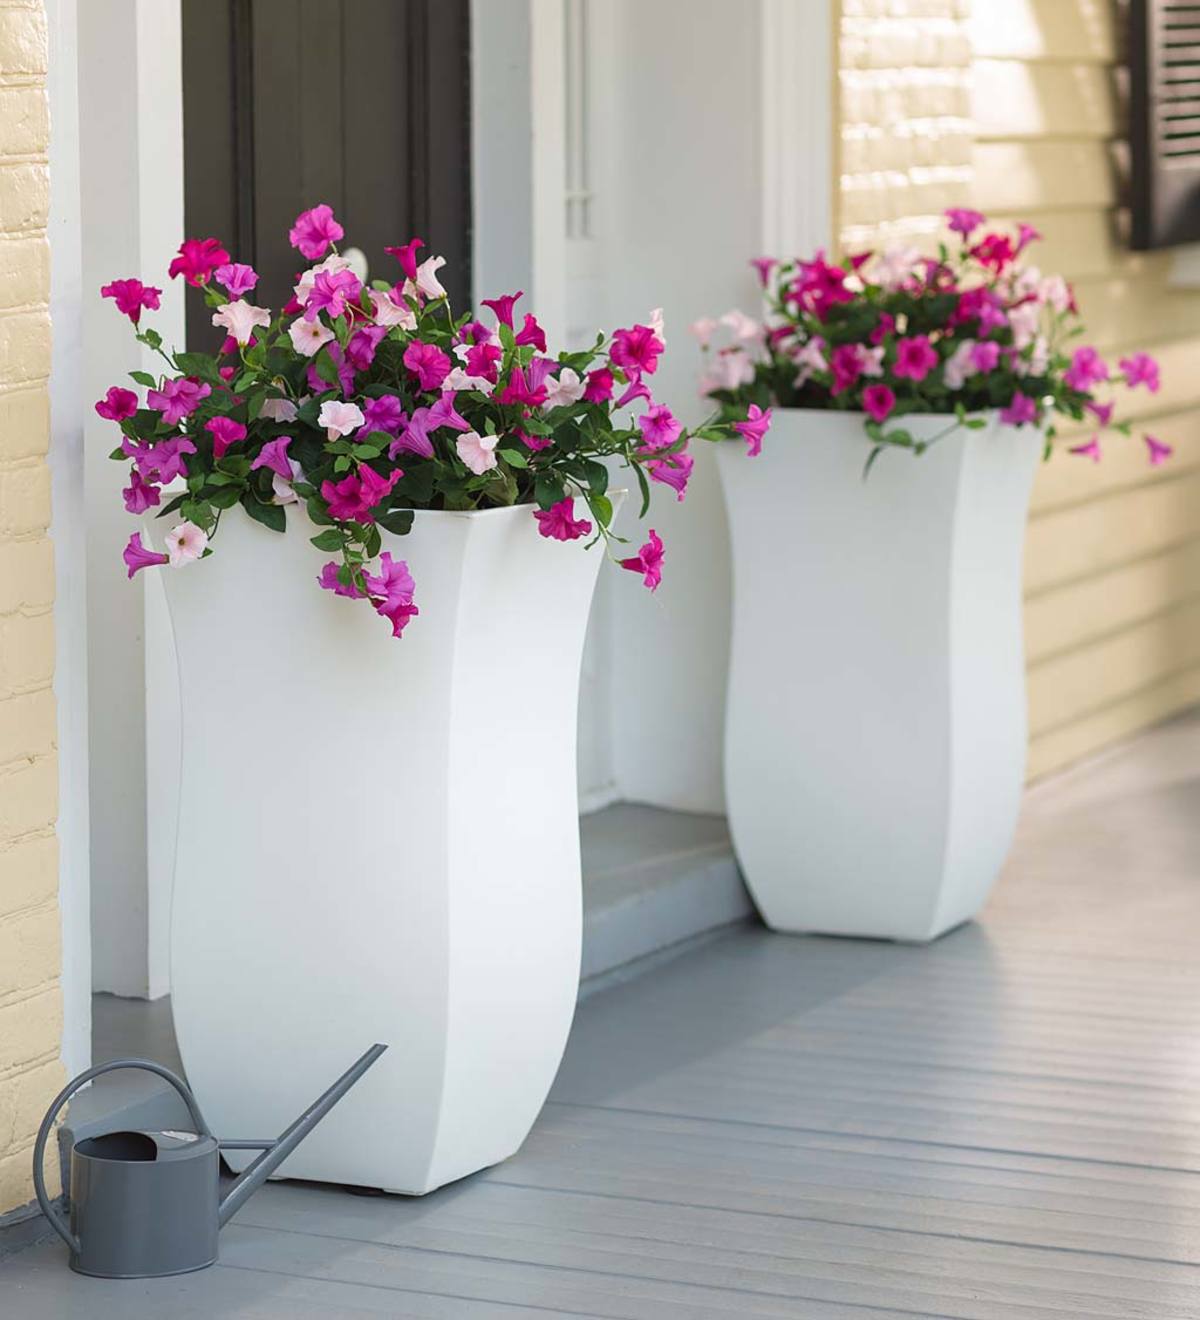 Valencia Planter with Double Wall Design, Tall